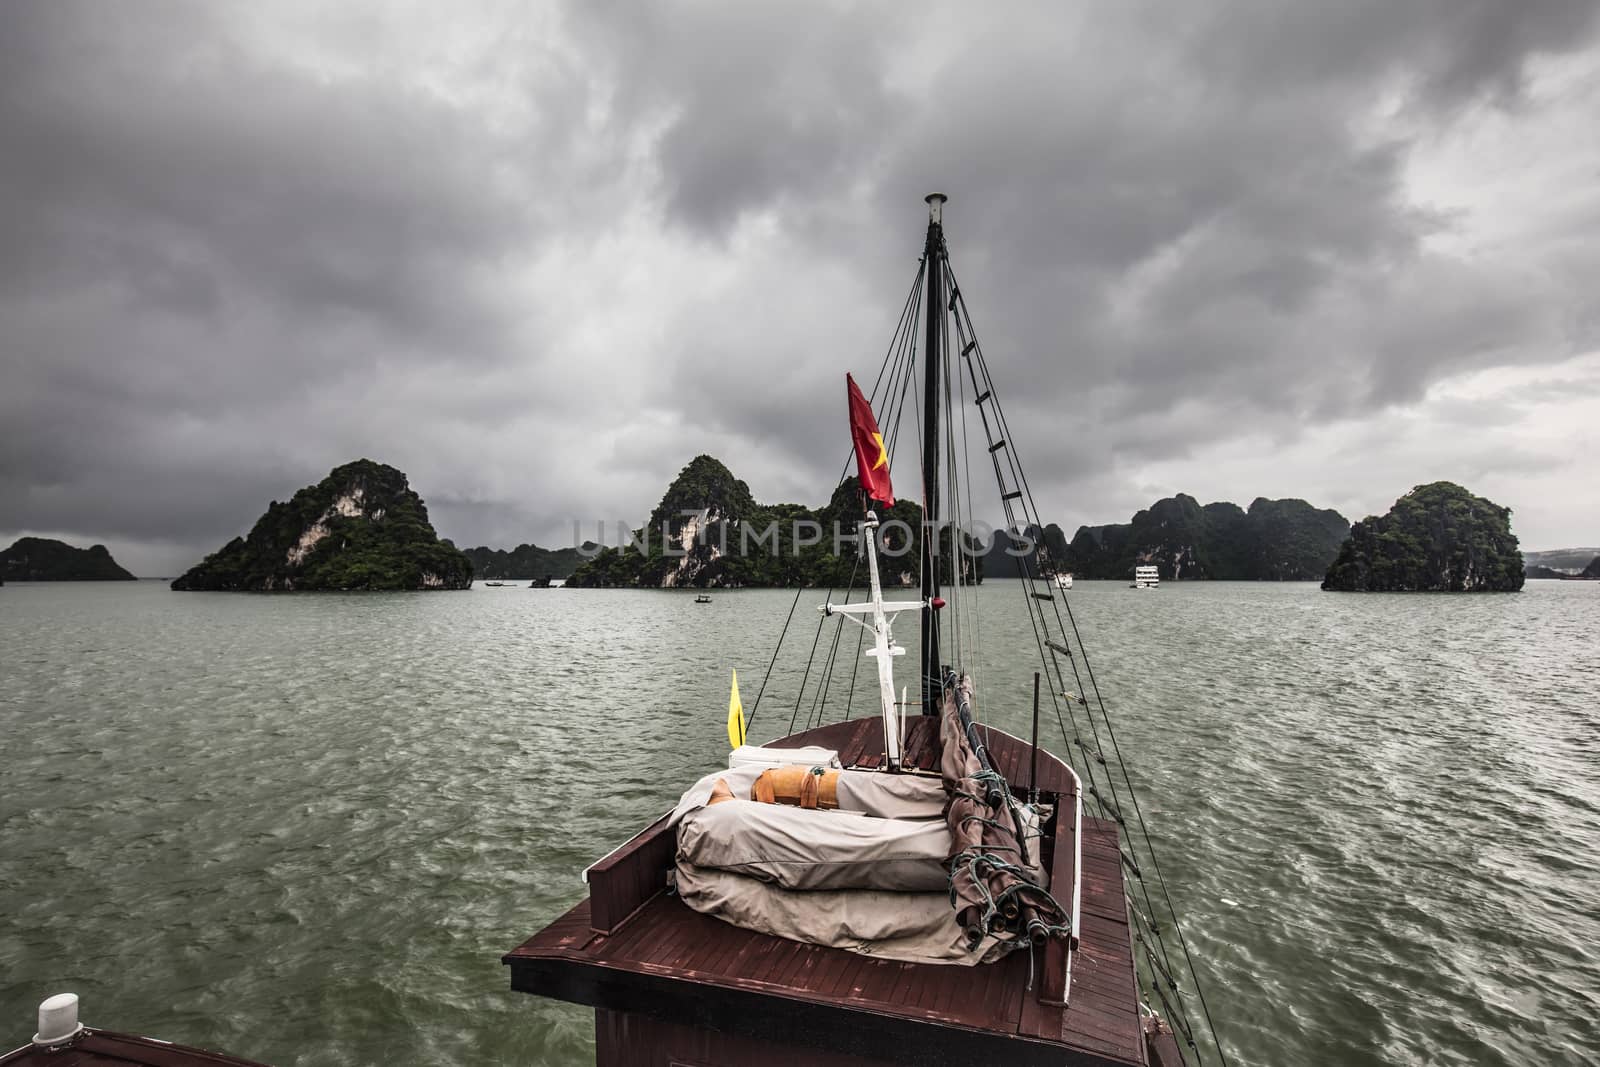 View throughout the islands of Ha Long Bay on a stormy summer's day in Ha Long Bay, Vietnam